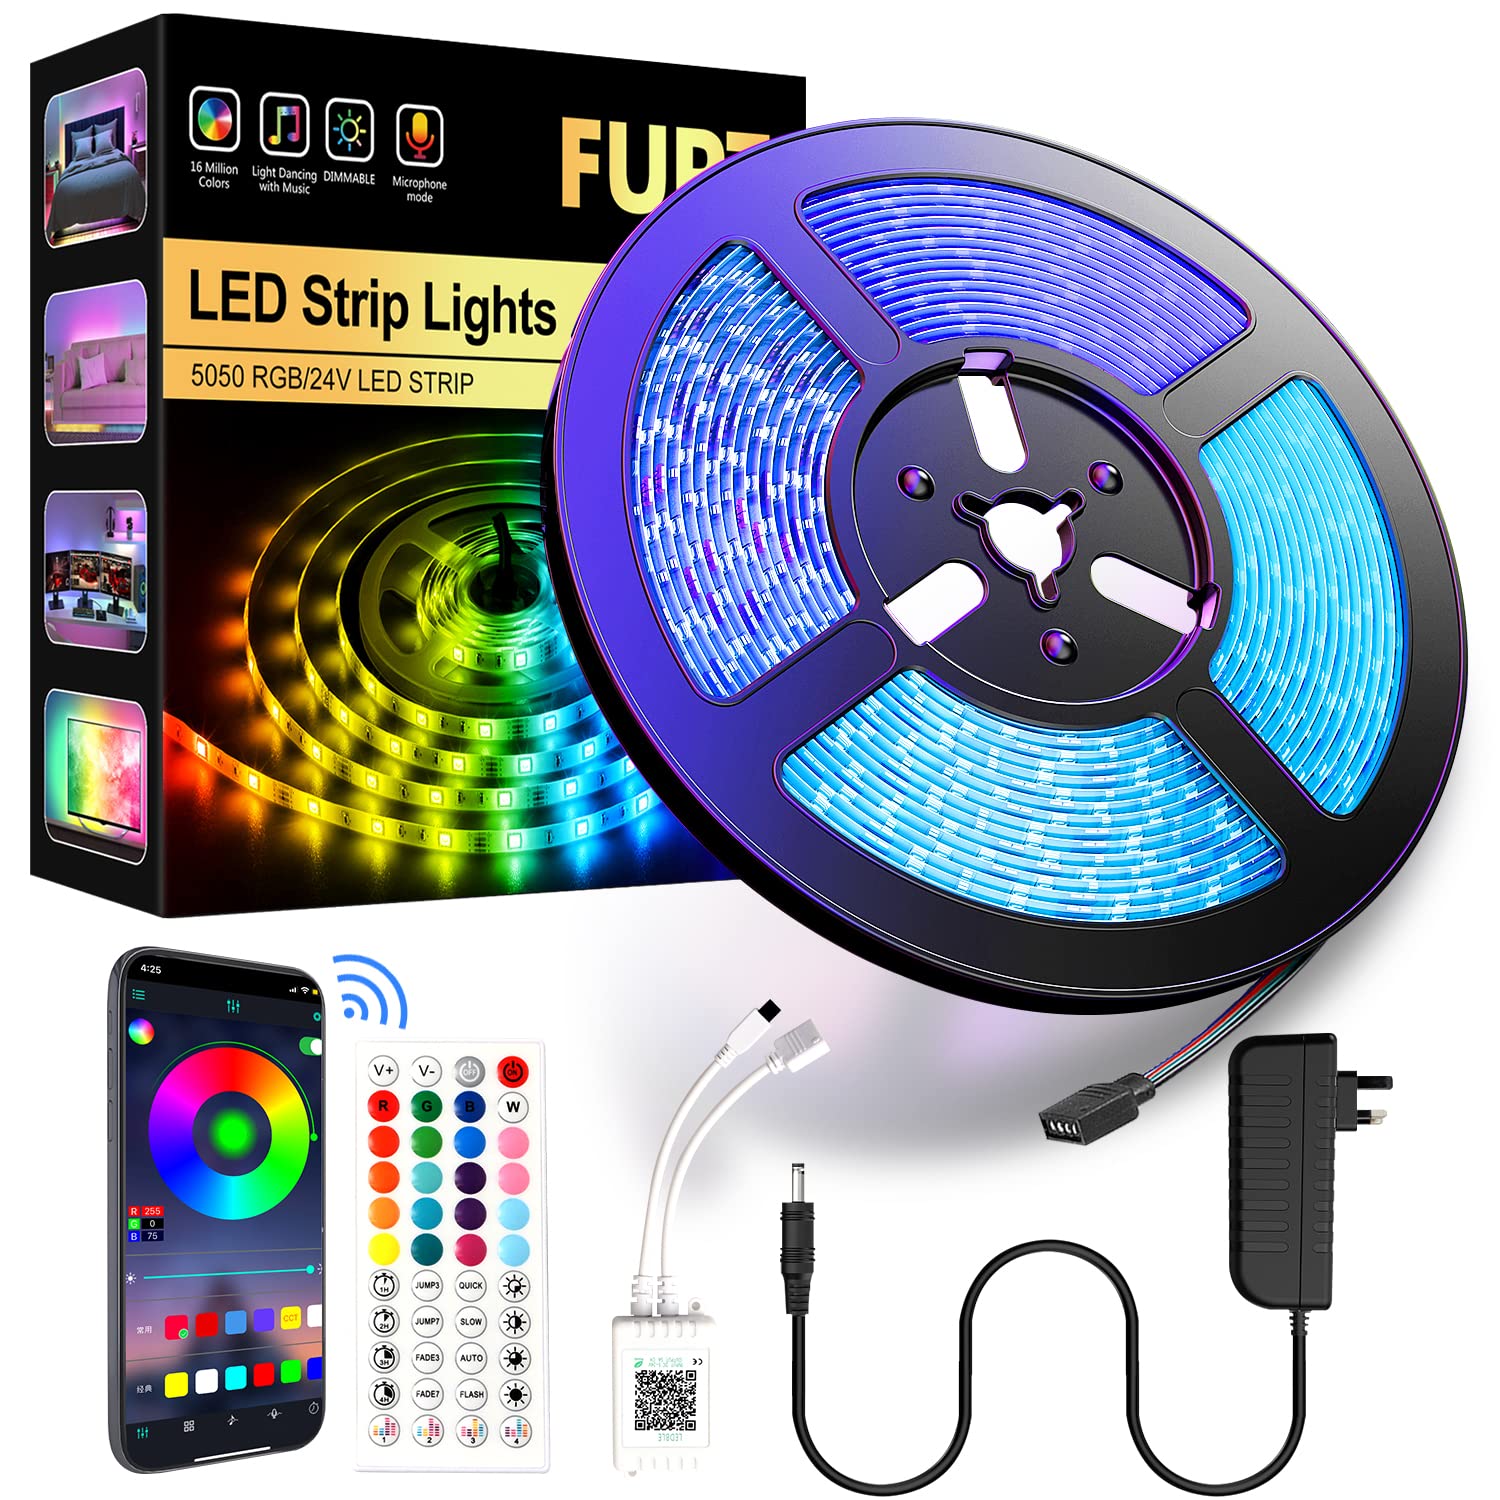 Led Strip Lights, (5m) Smart Light Strips with App Control Remote, 5050 RGB Led Lights for Bedroom,TV Music Sync Color Changing Lights for Room Party